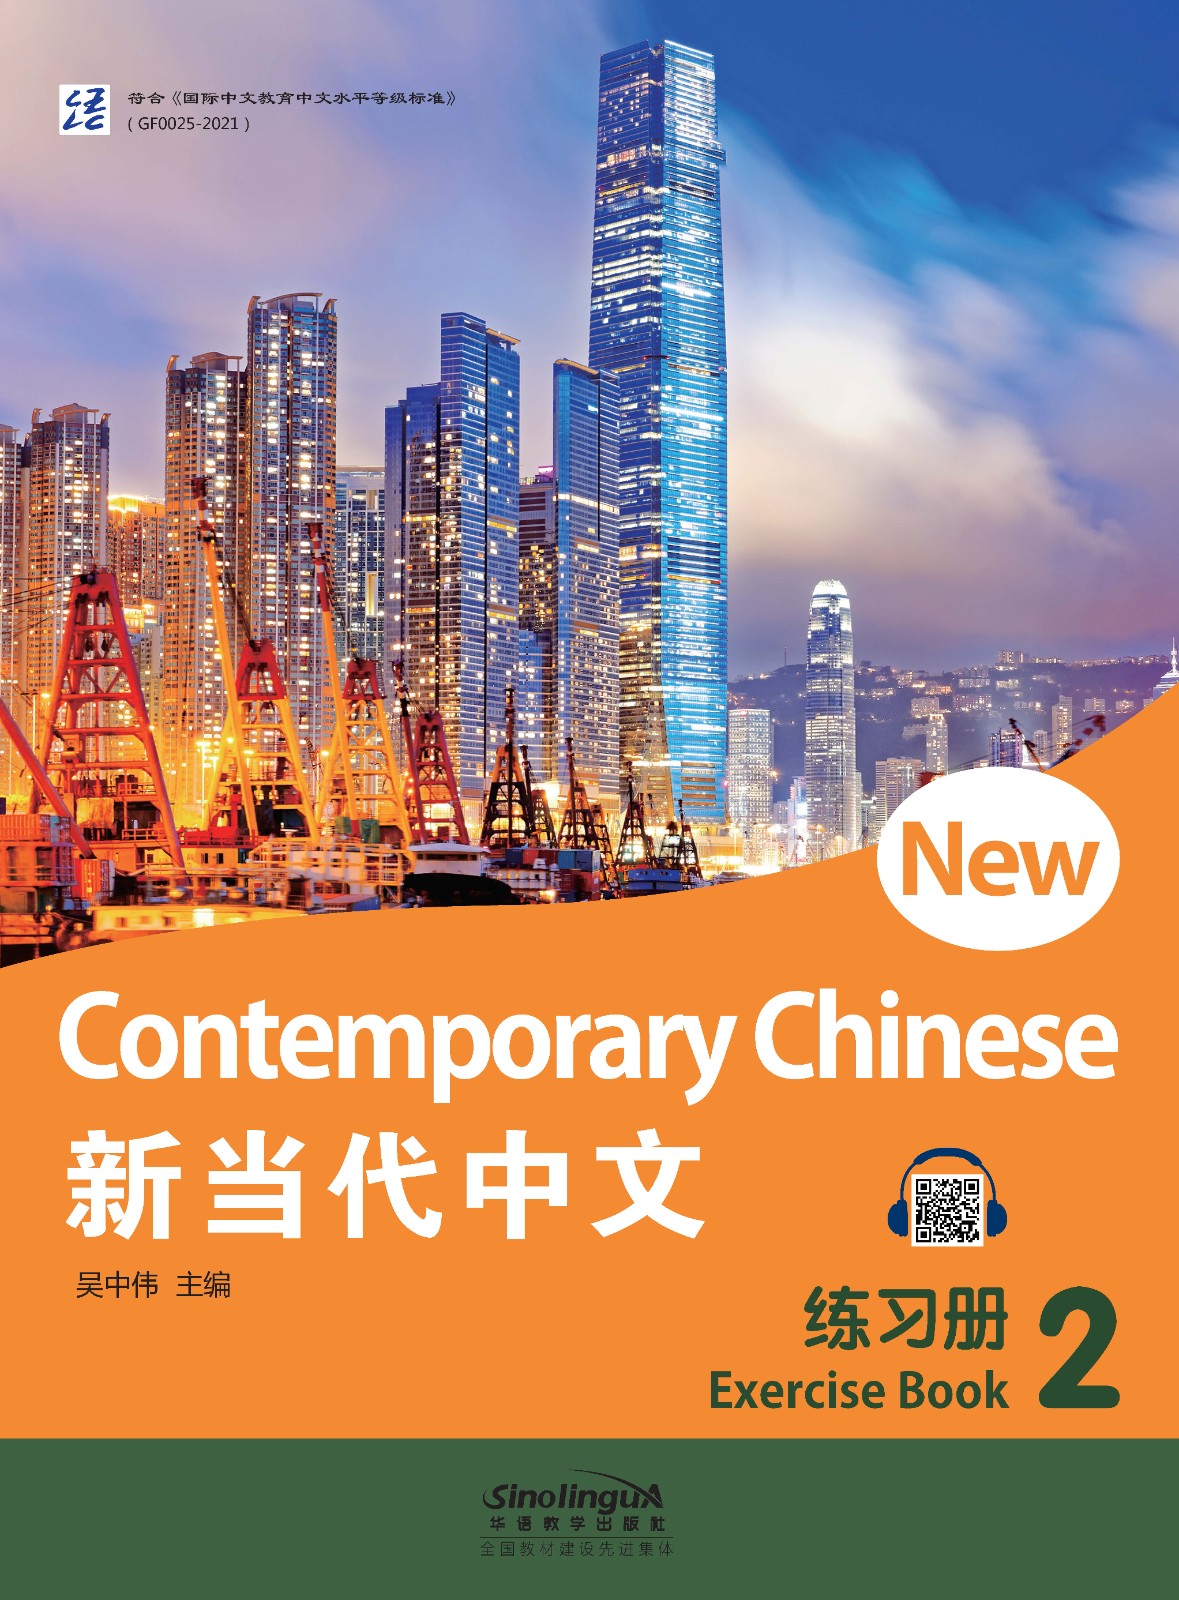 New Contemporary Chinese--Exercise Book 2